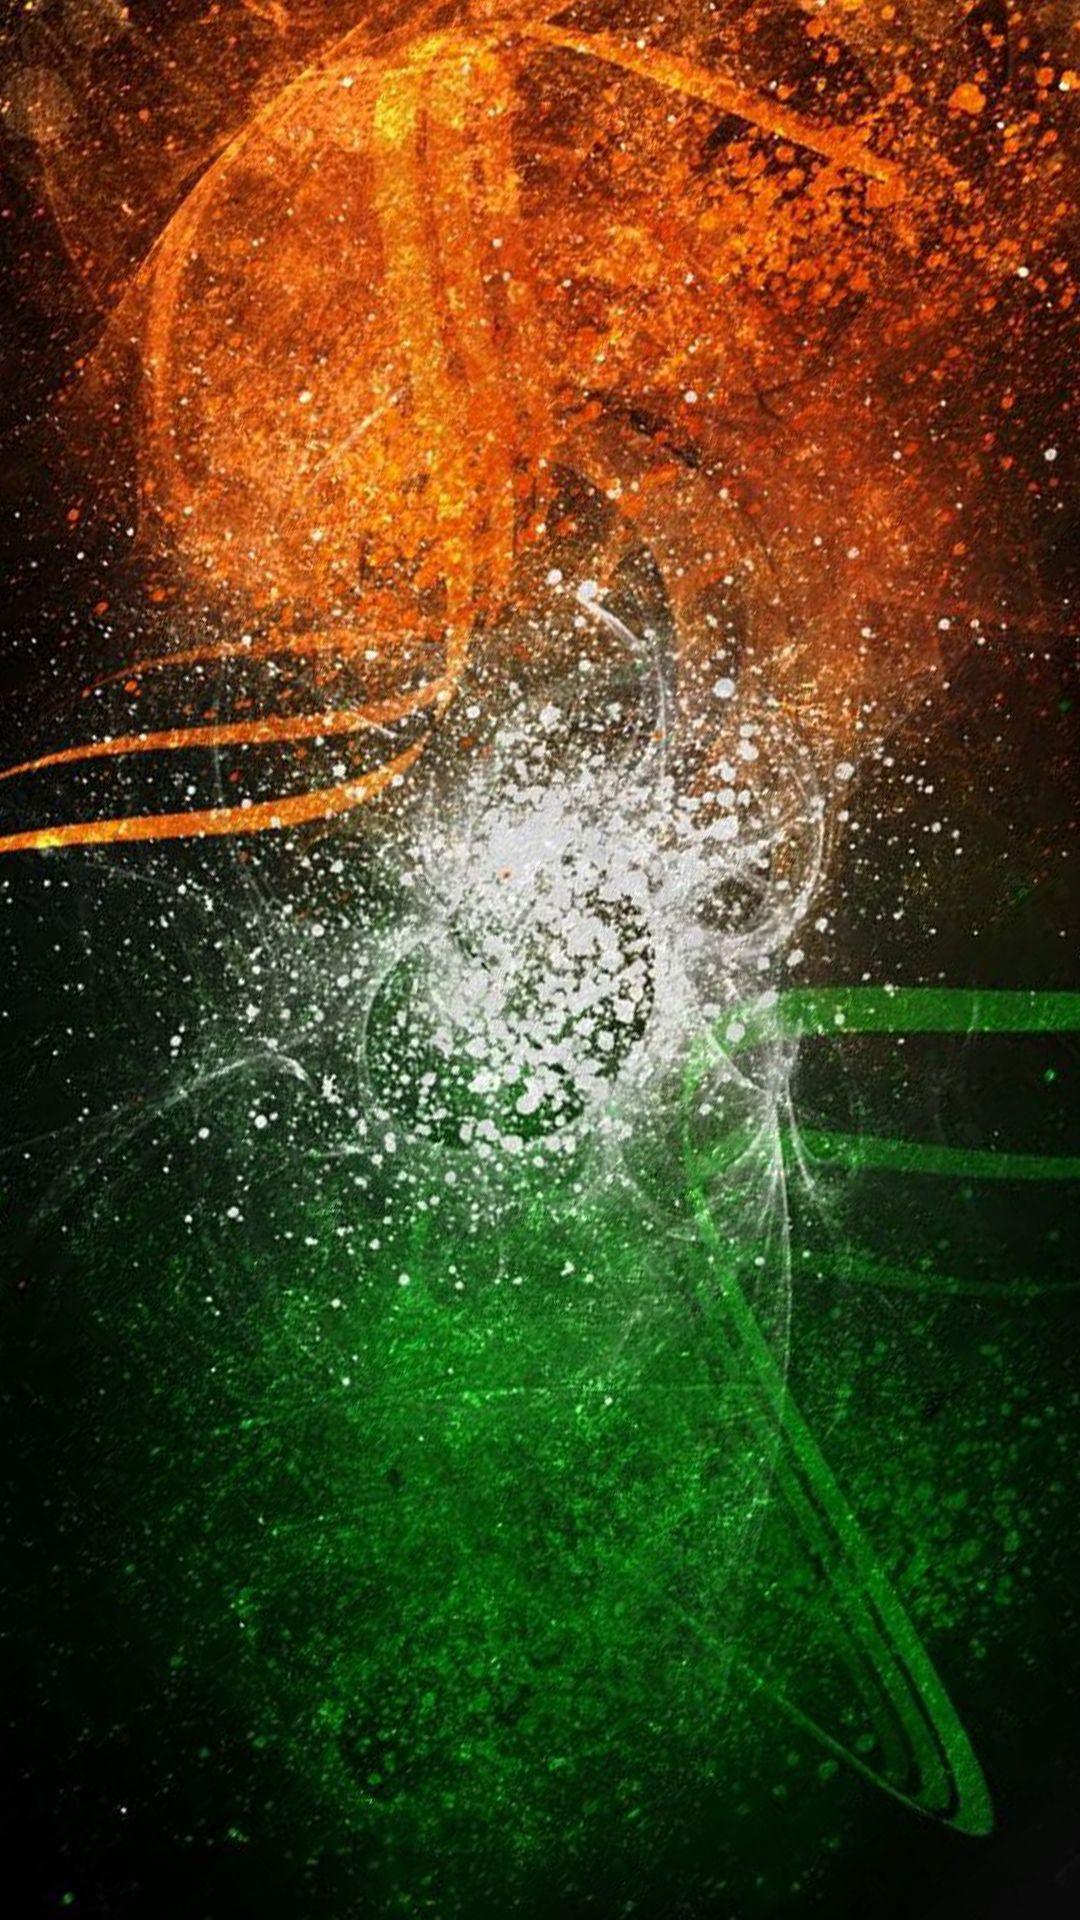 India Flag for Mobile Phone Wallpaper 17 of 17 Tricolor Wallpaper. Wallpaper Download. High Resolution Wallpaper. Indian flag wallpaper, Army wallpaper, Abstract wallpaper background